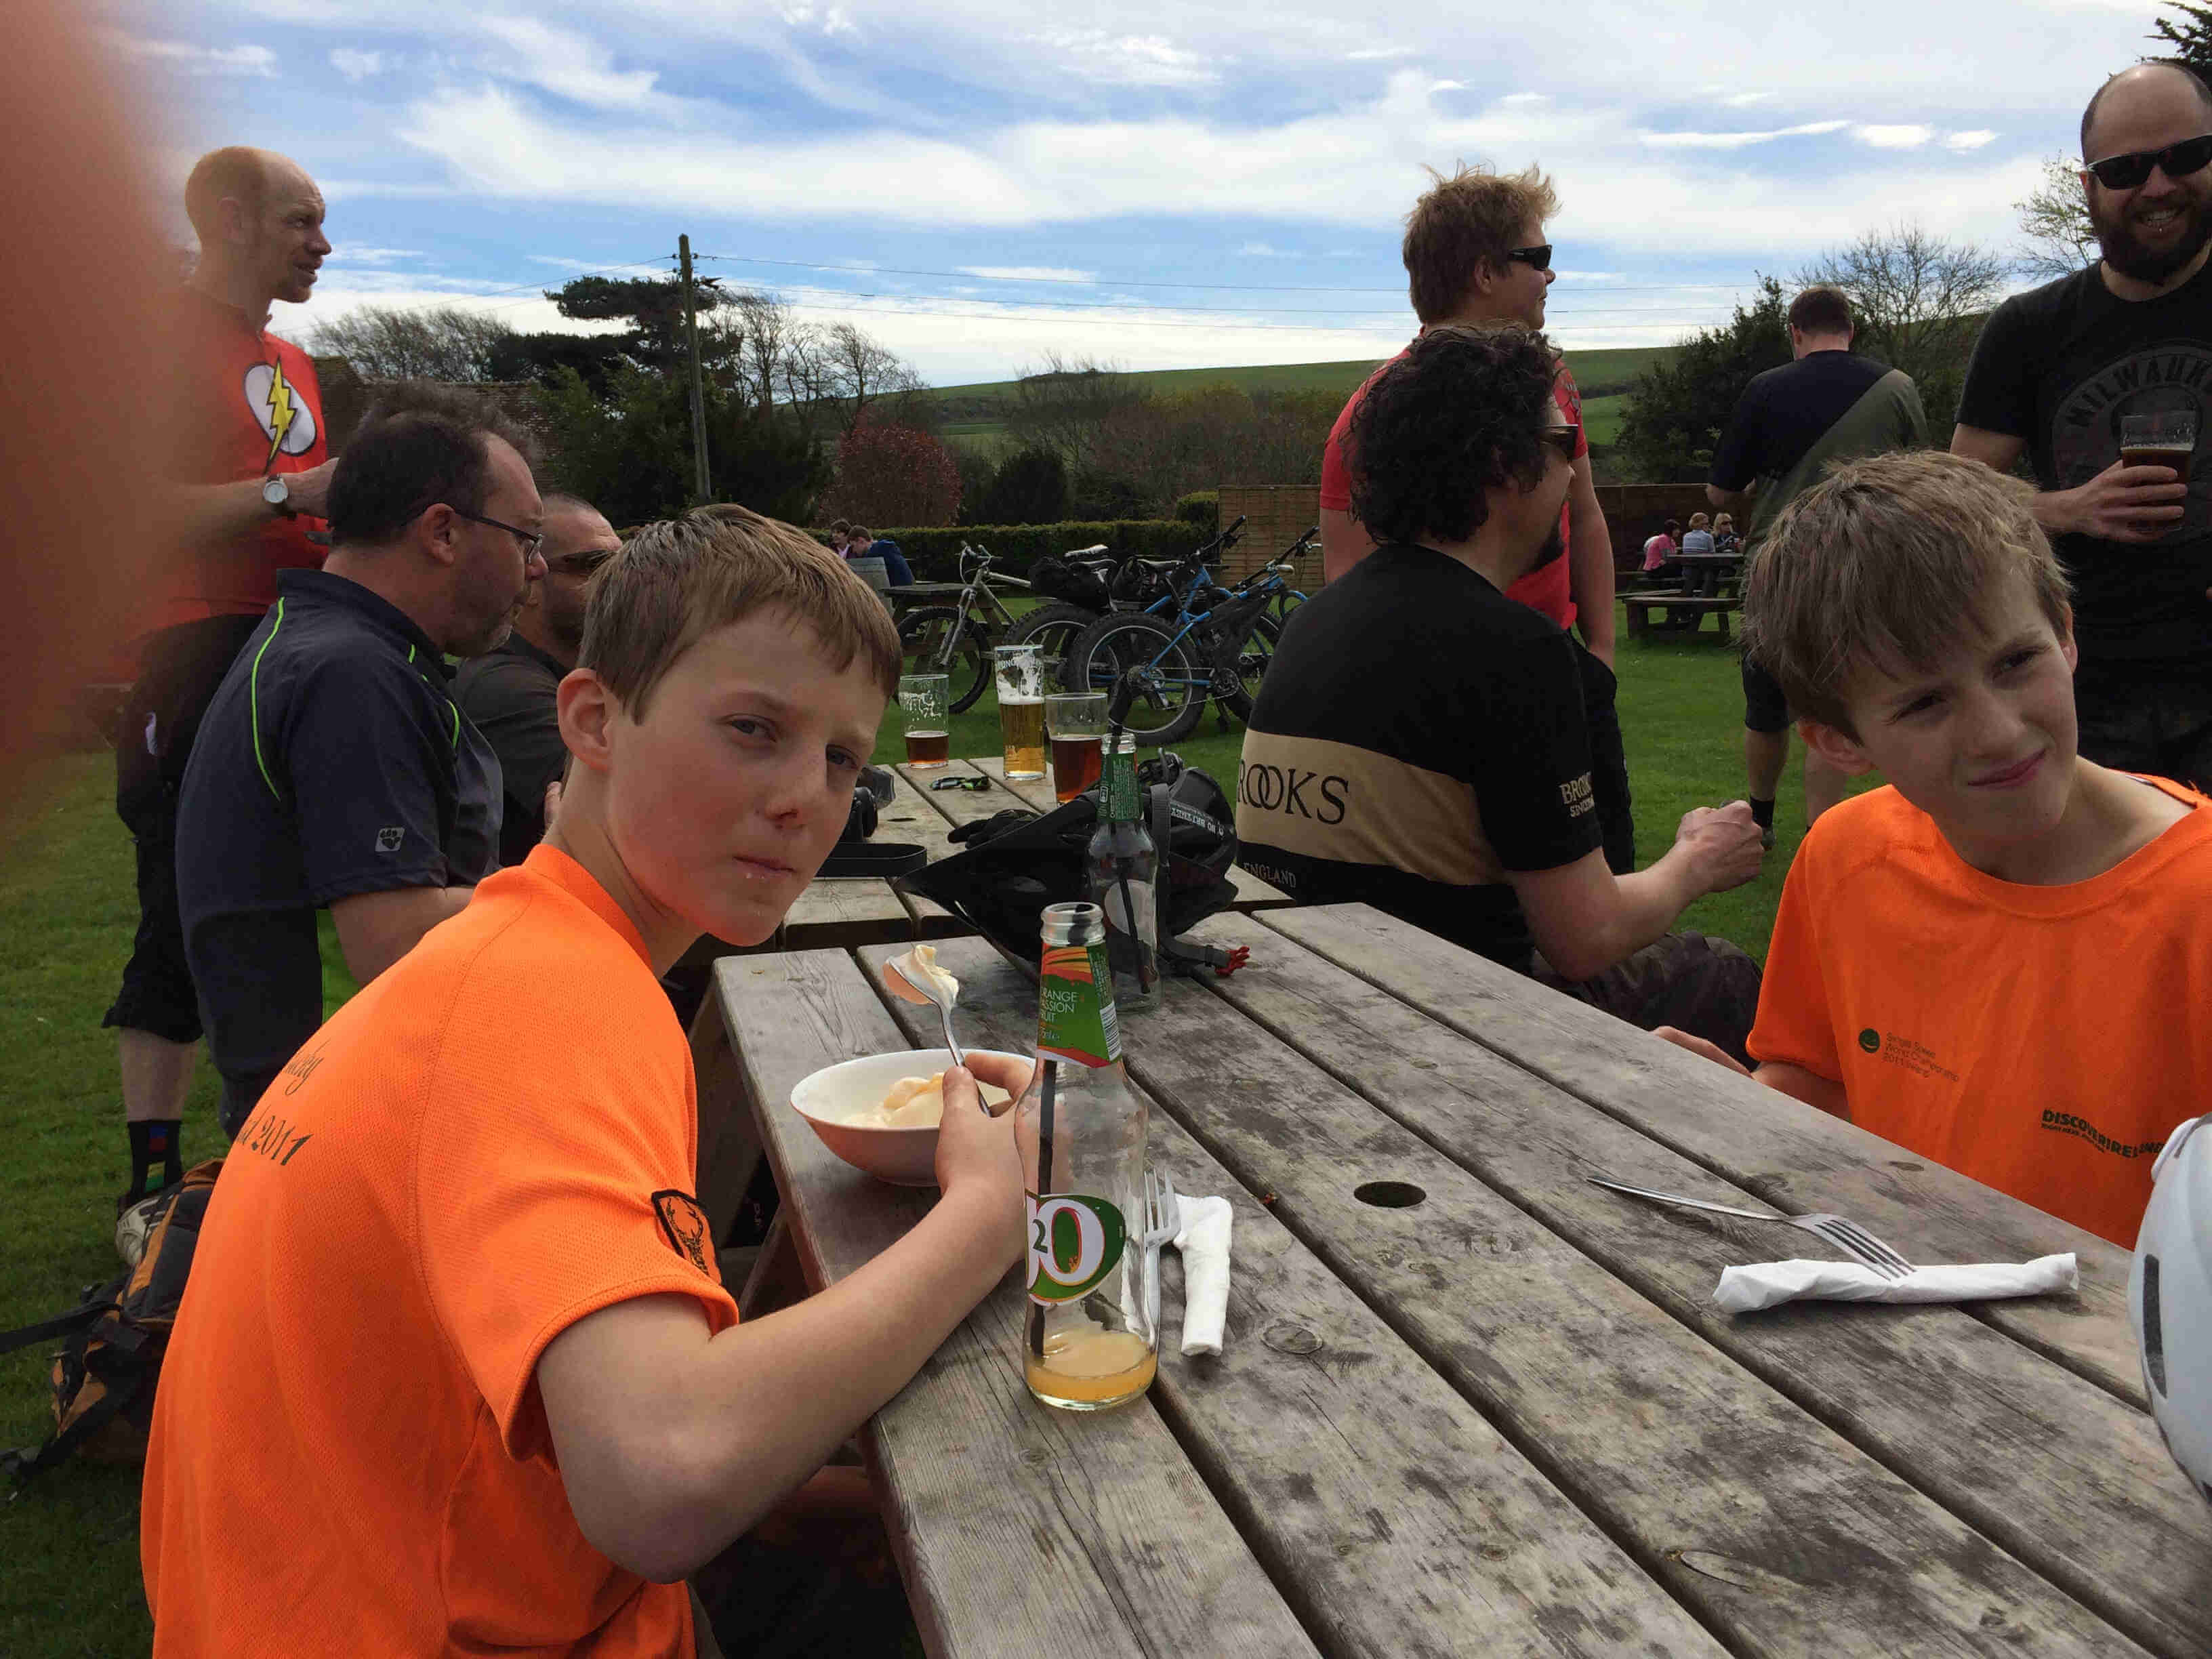 Two children wearing orange t-shirts, sit across from each other on a picnic table, with people and bikes behind them